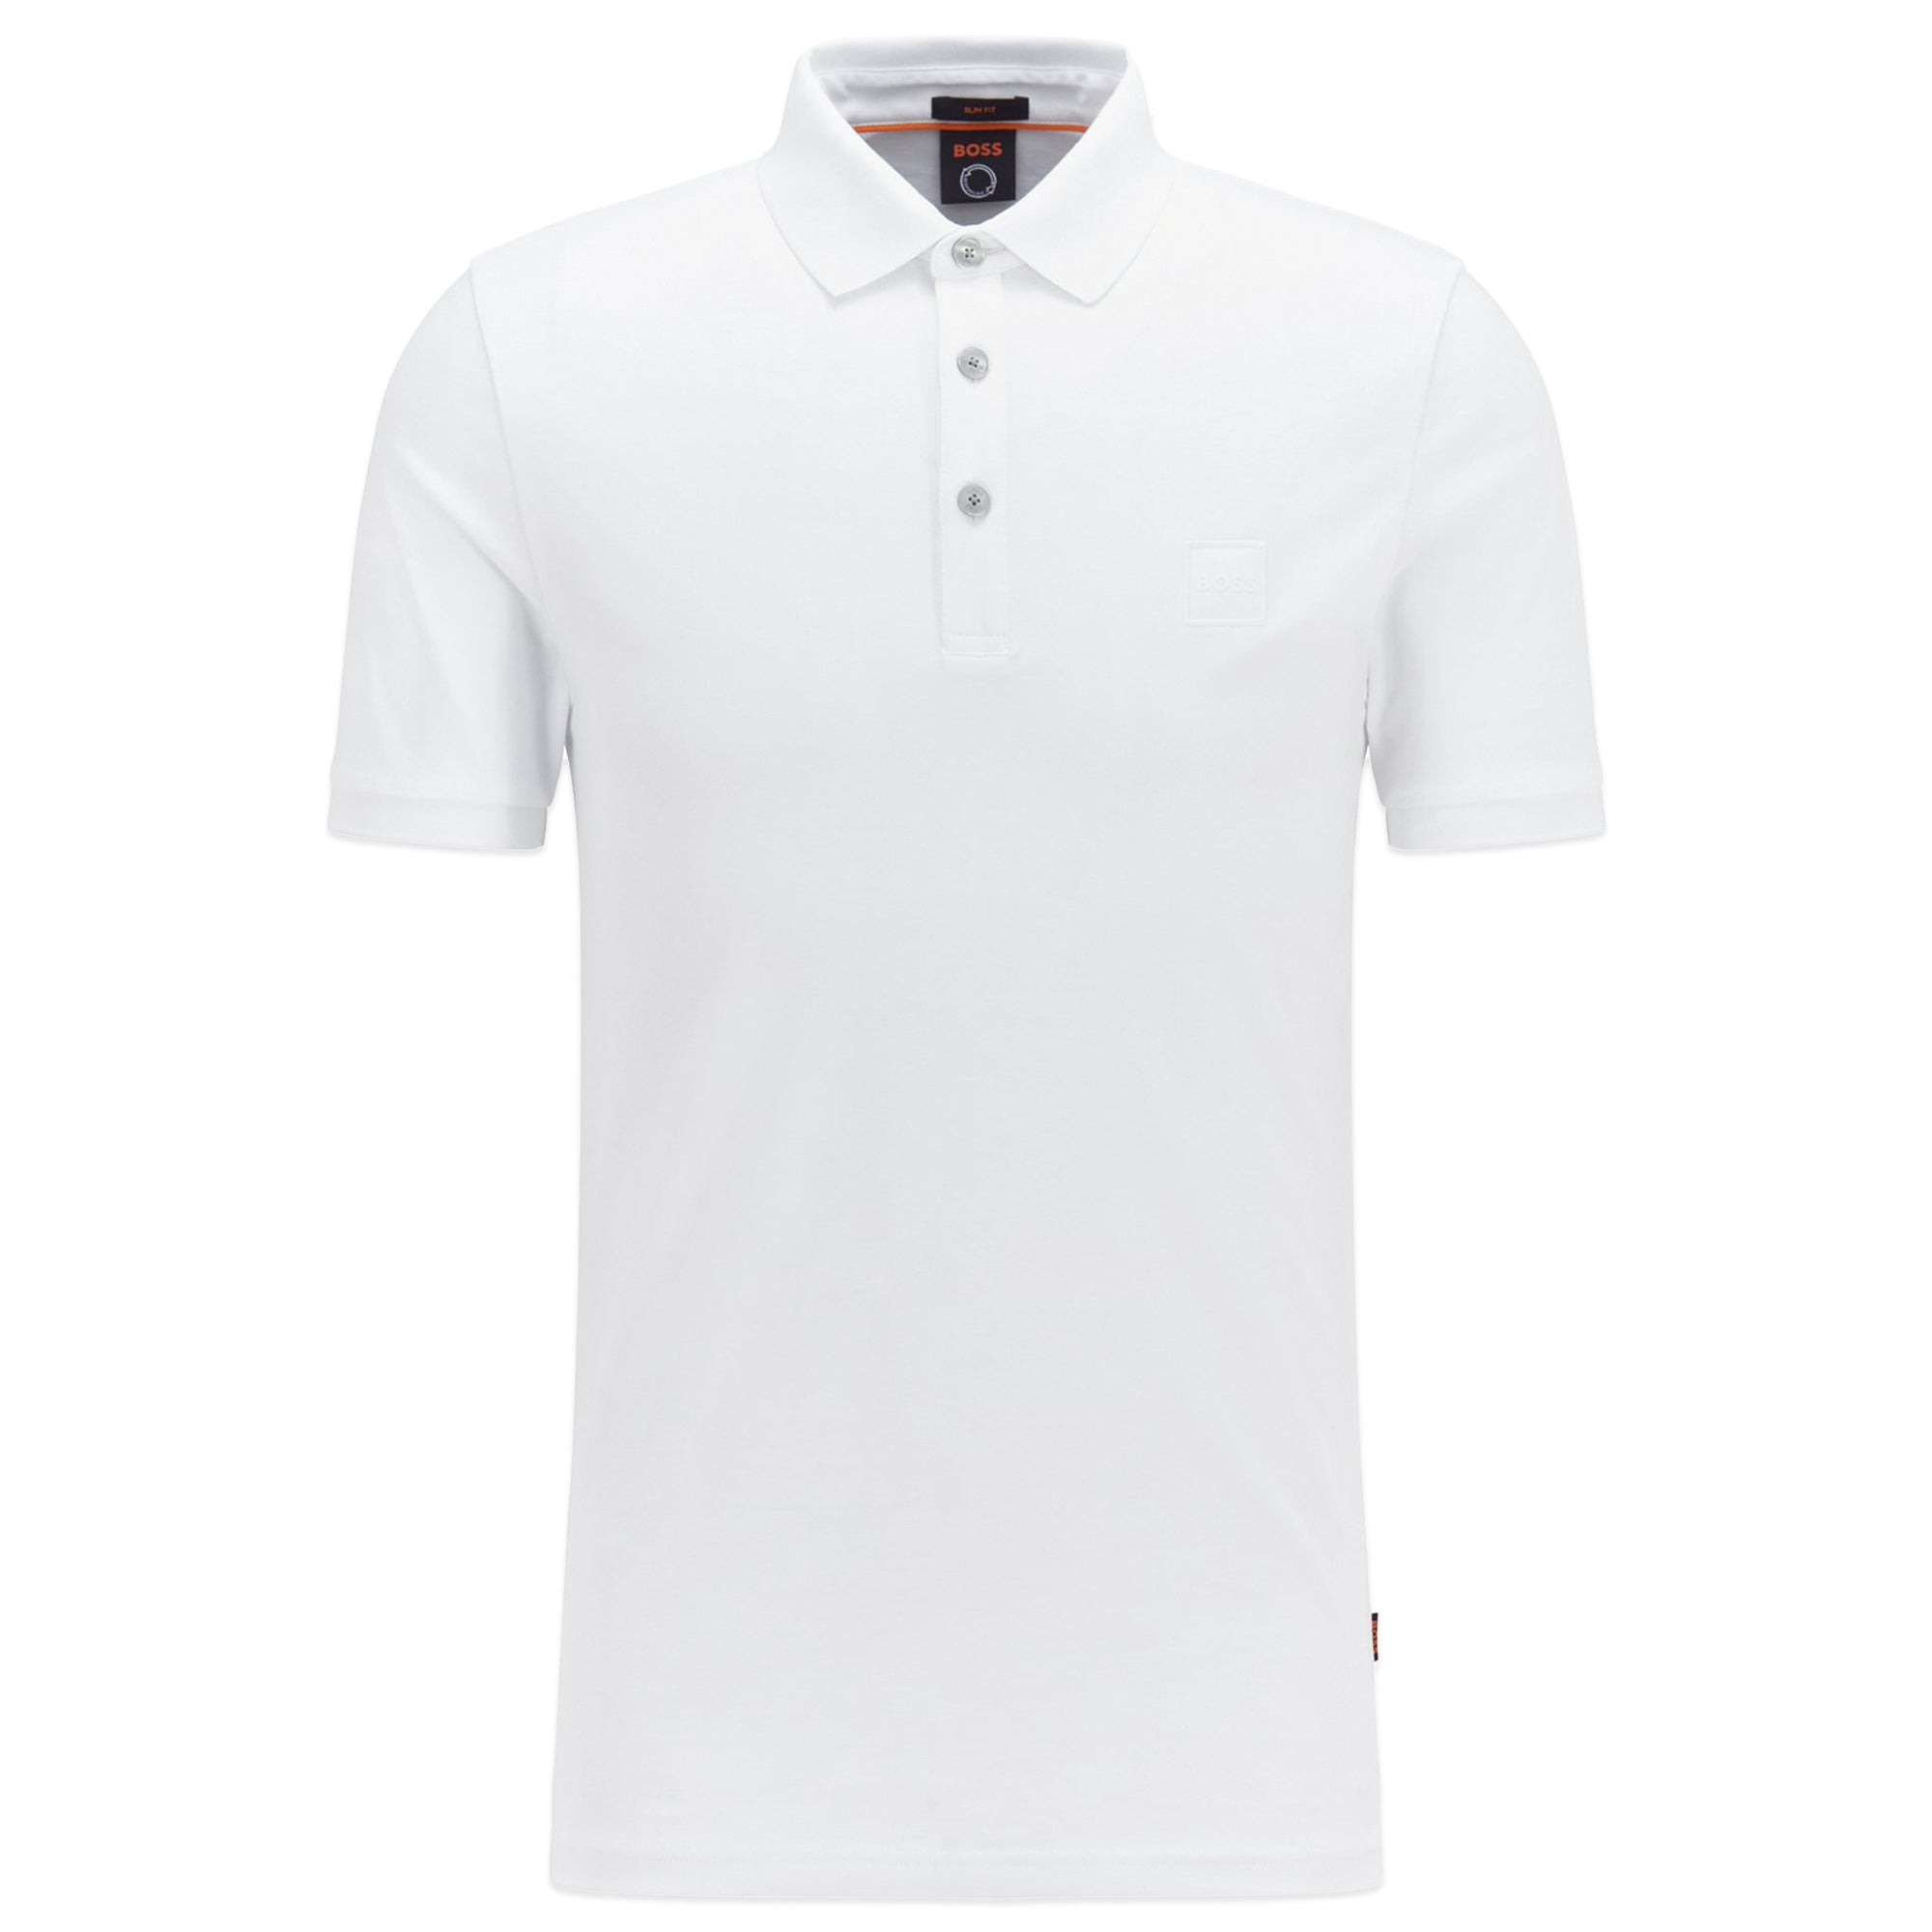 Boss Passerby Long - Polo White 1 Sleeve